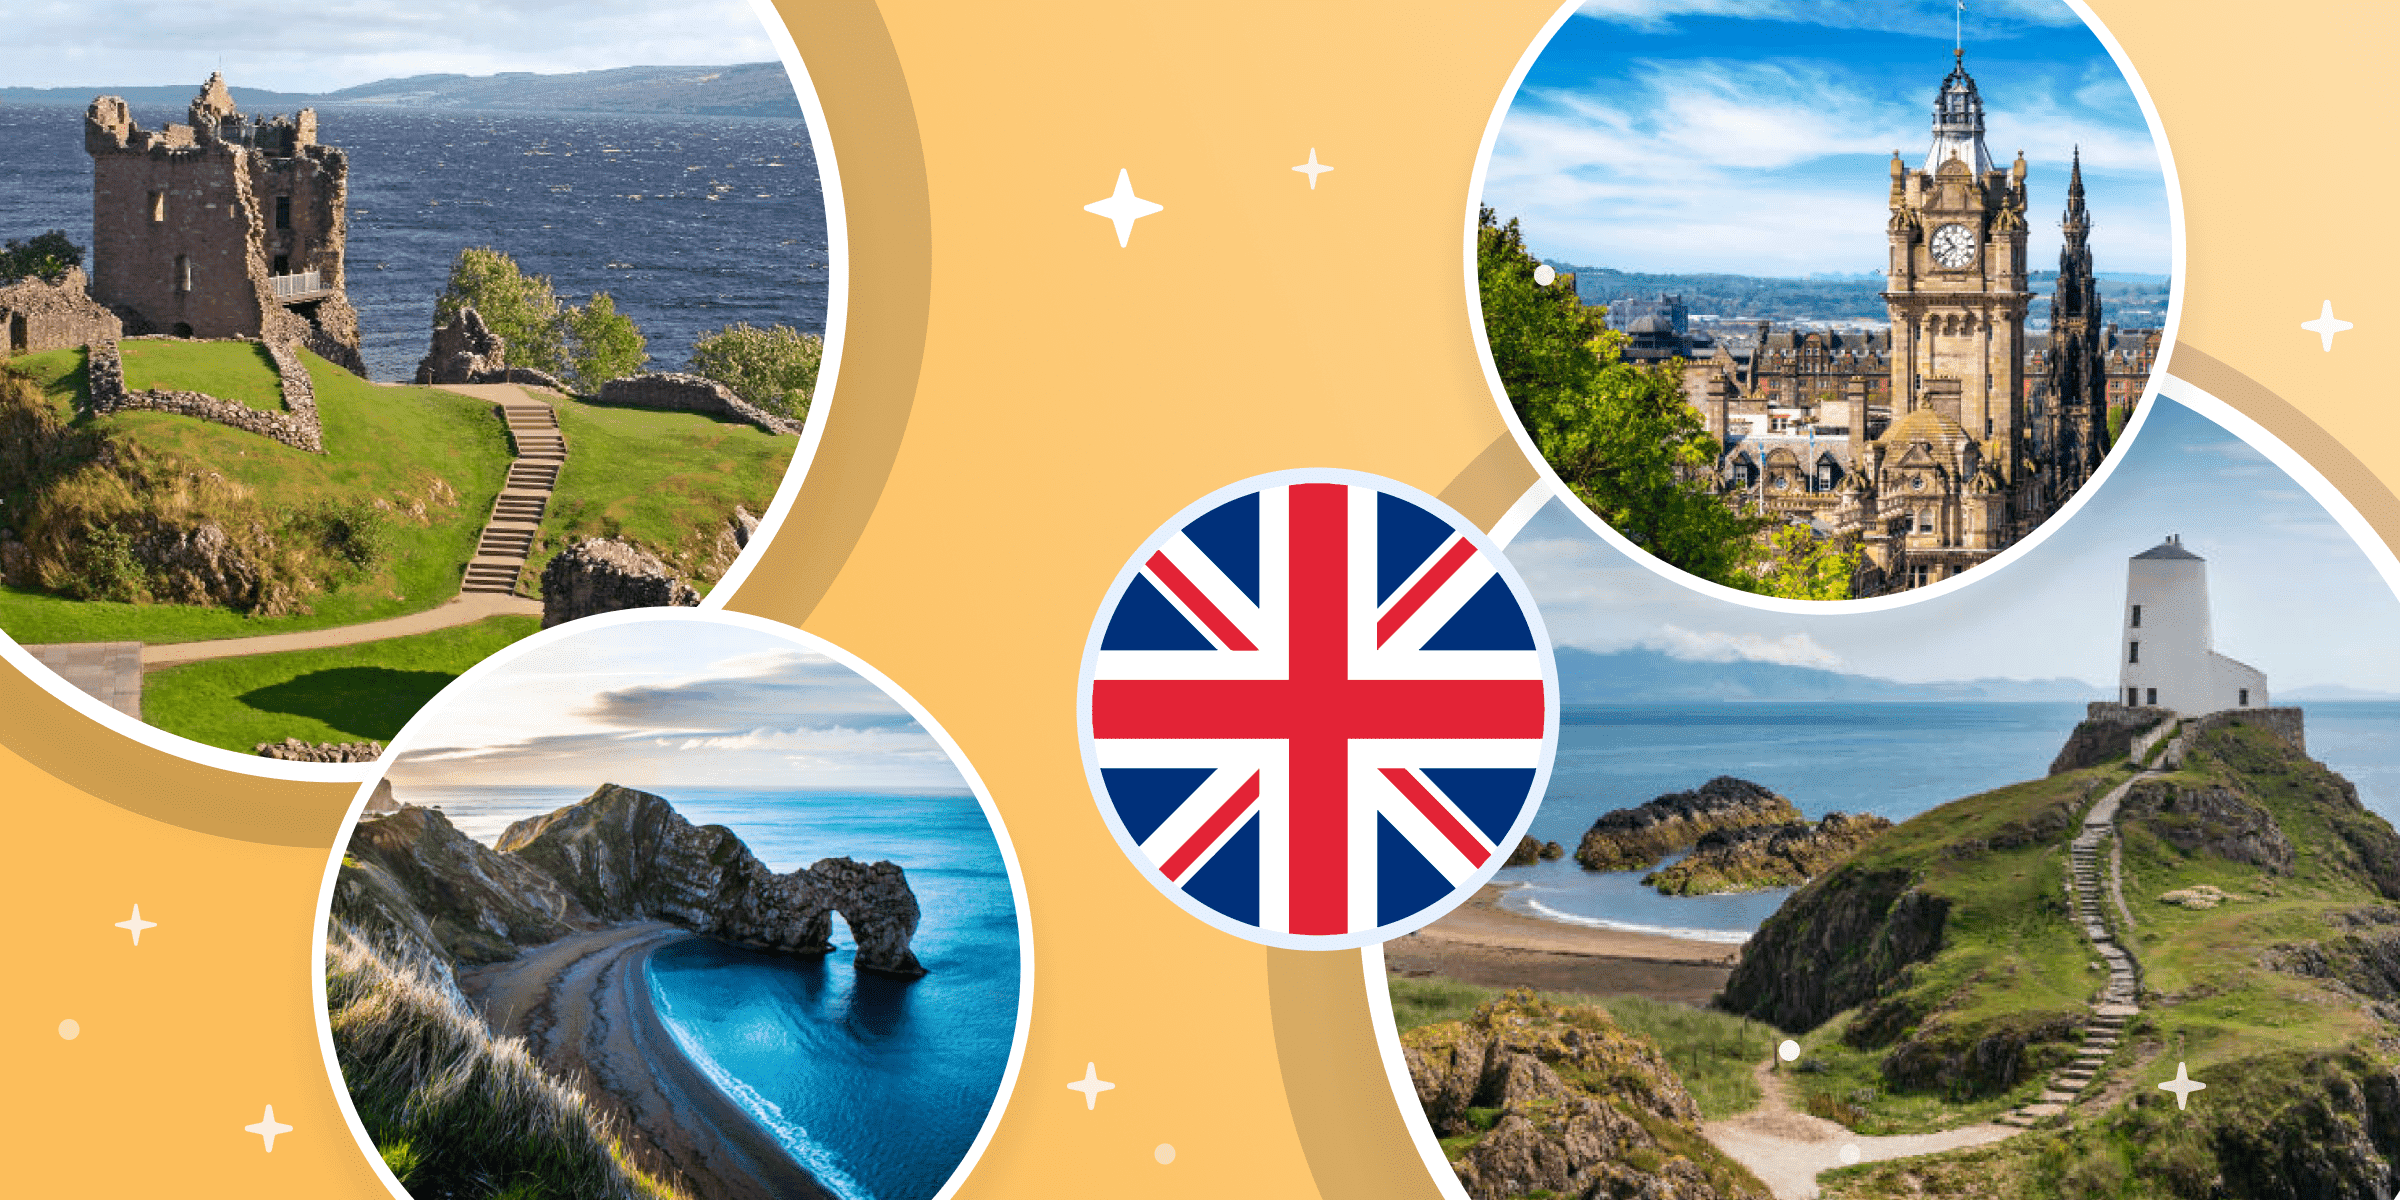 Photos of picturesque landscapes in the United Kingdom and an illustration of the union jack.